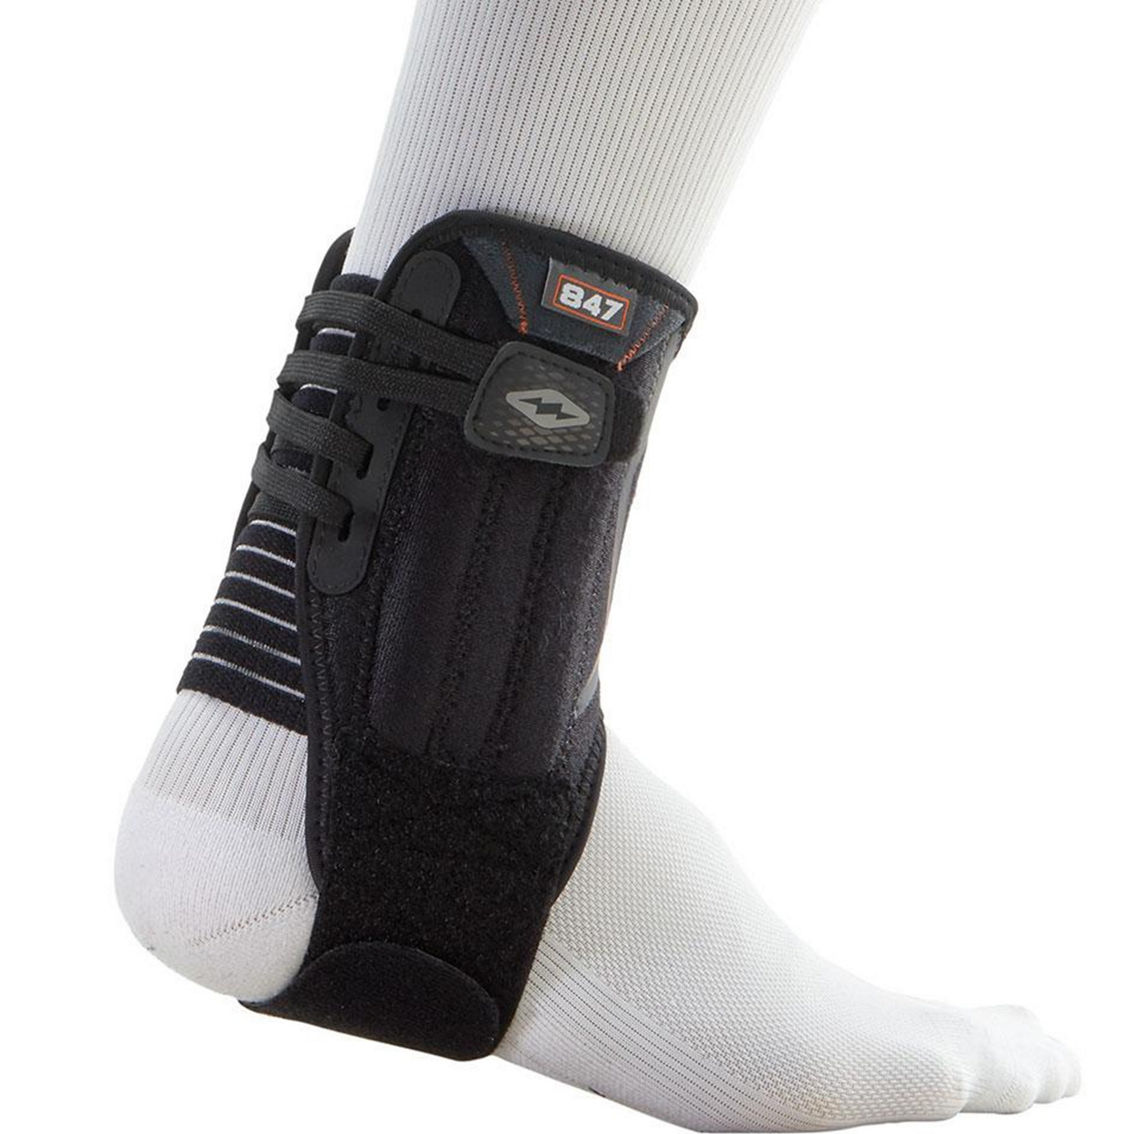 Shock Doctor Ankle Stabilizer - Image 3 of 3